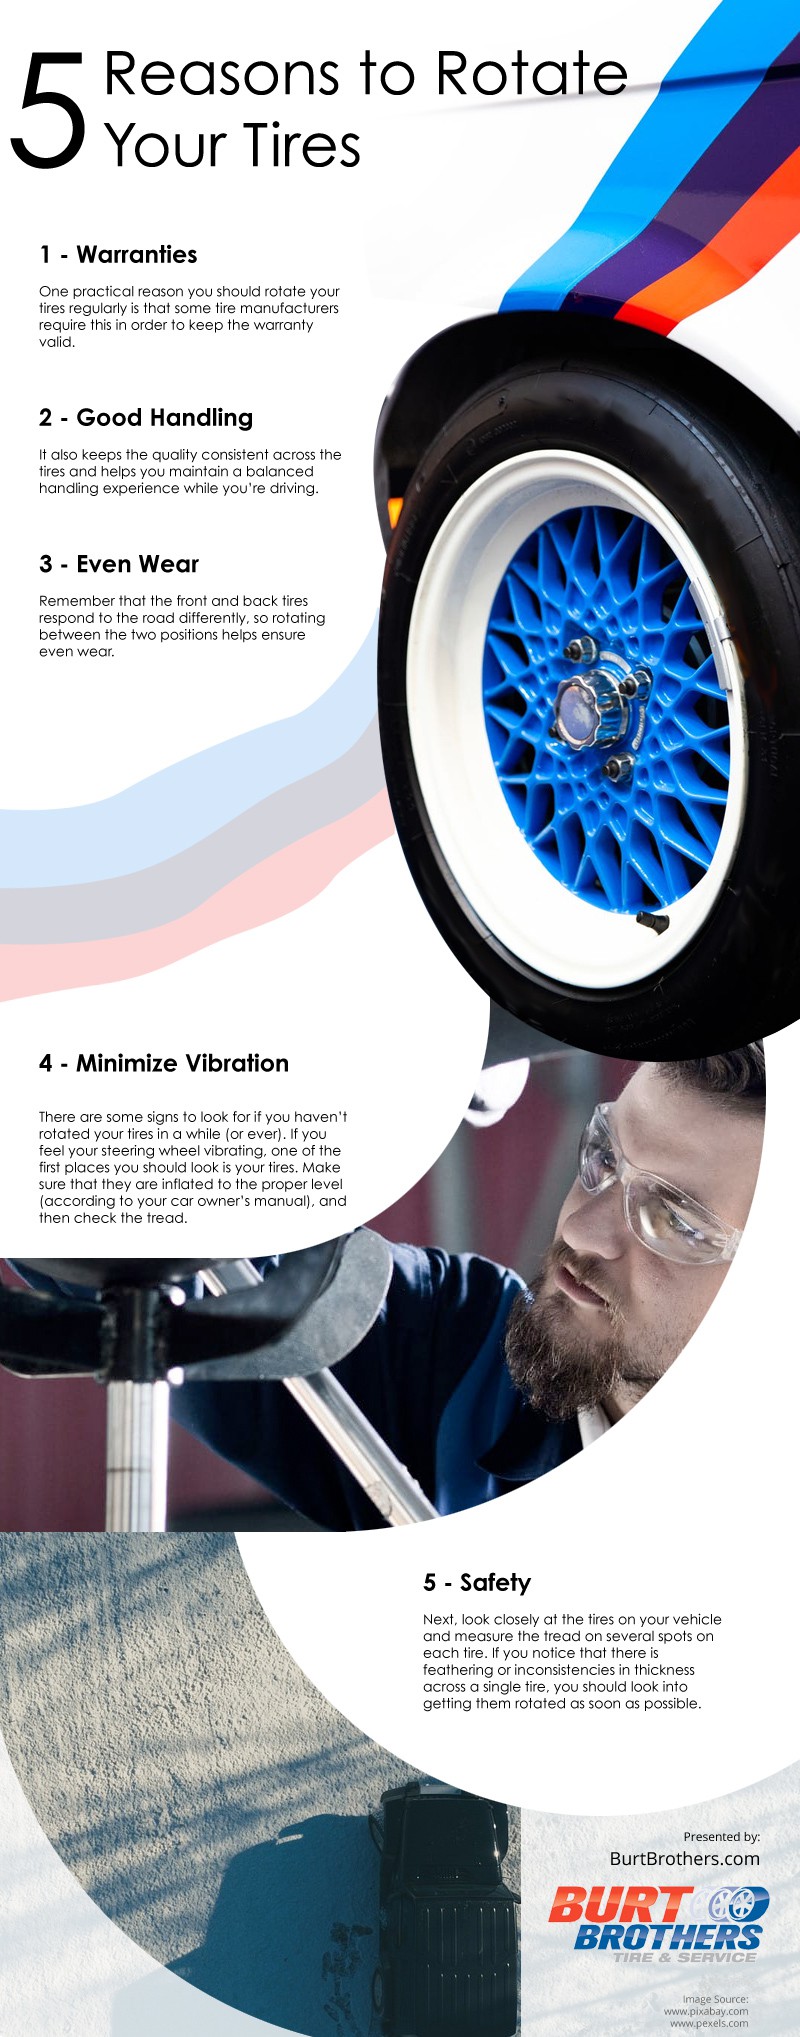 5 Reasons to Rotate Your Tires Infographic